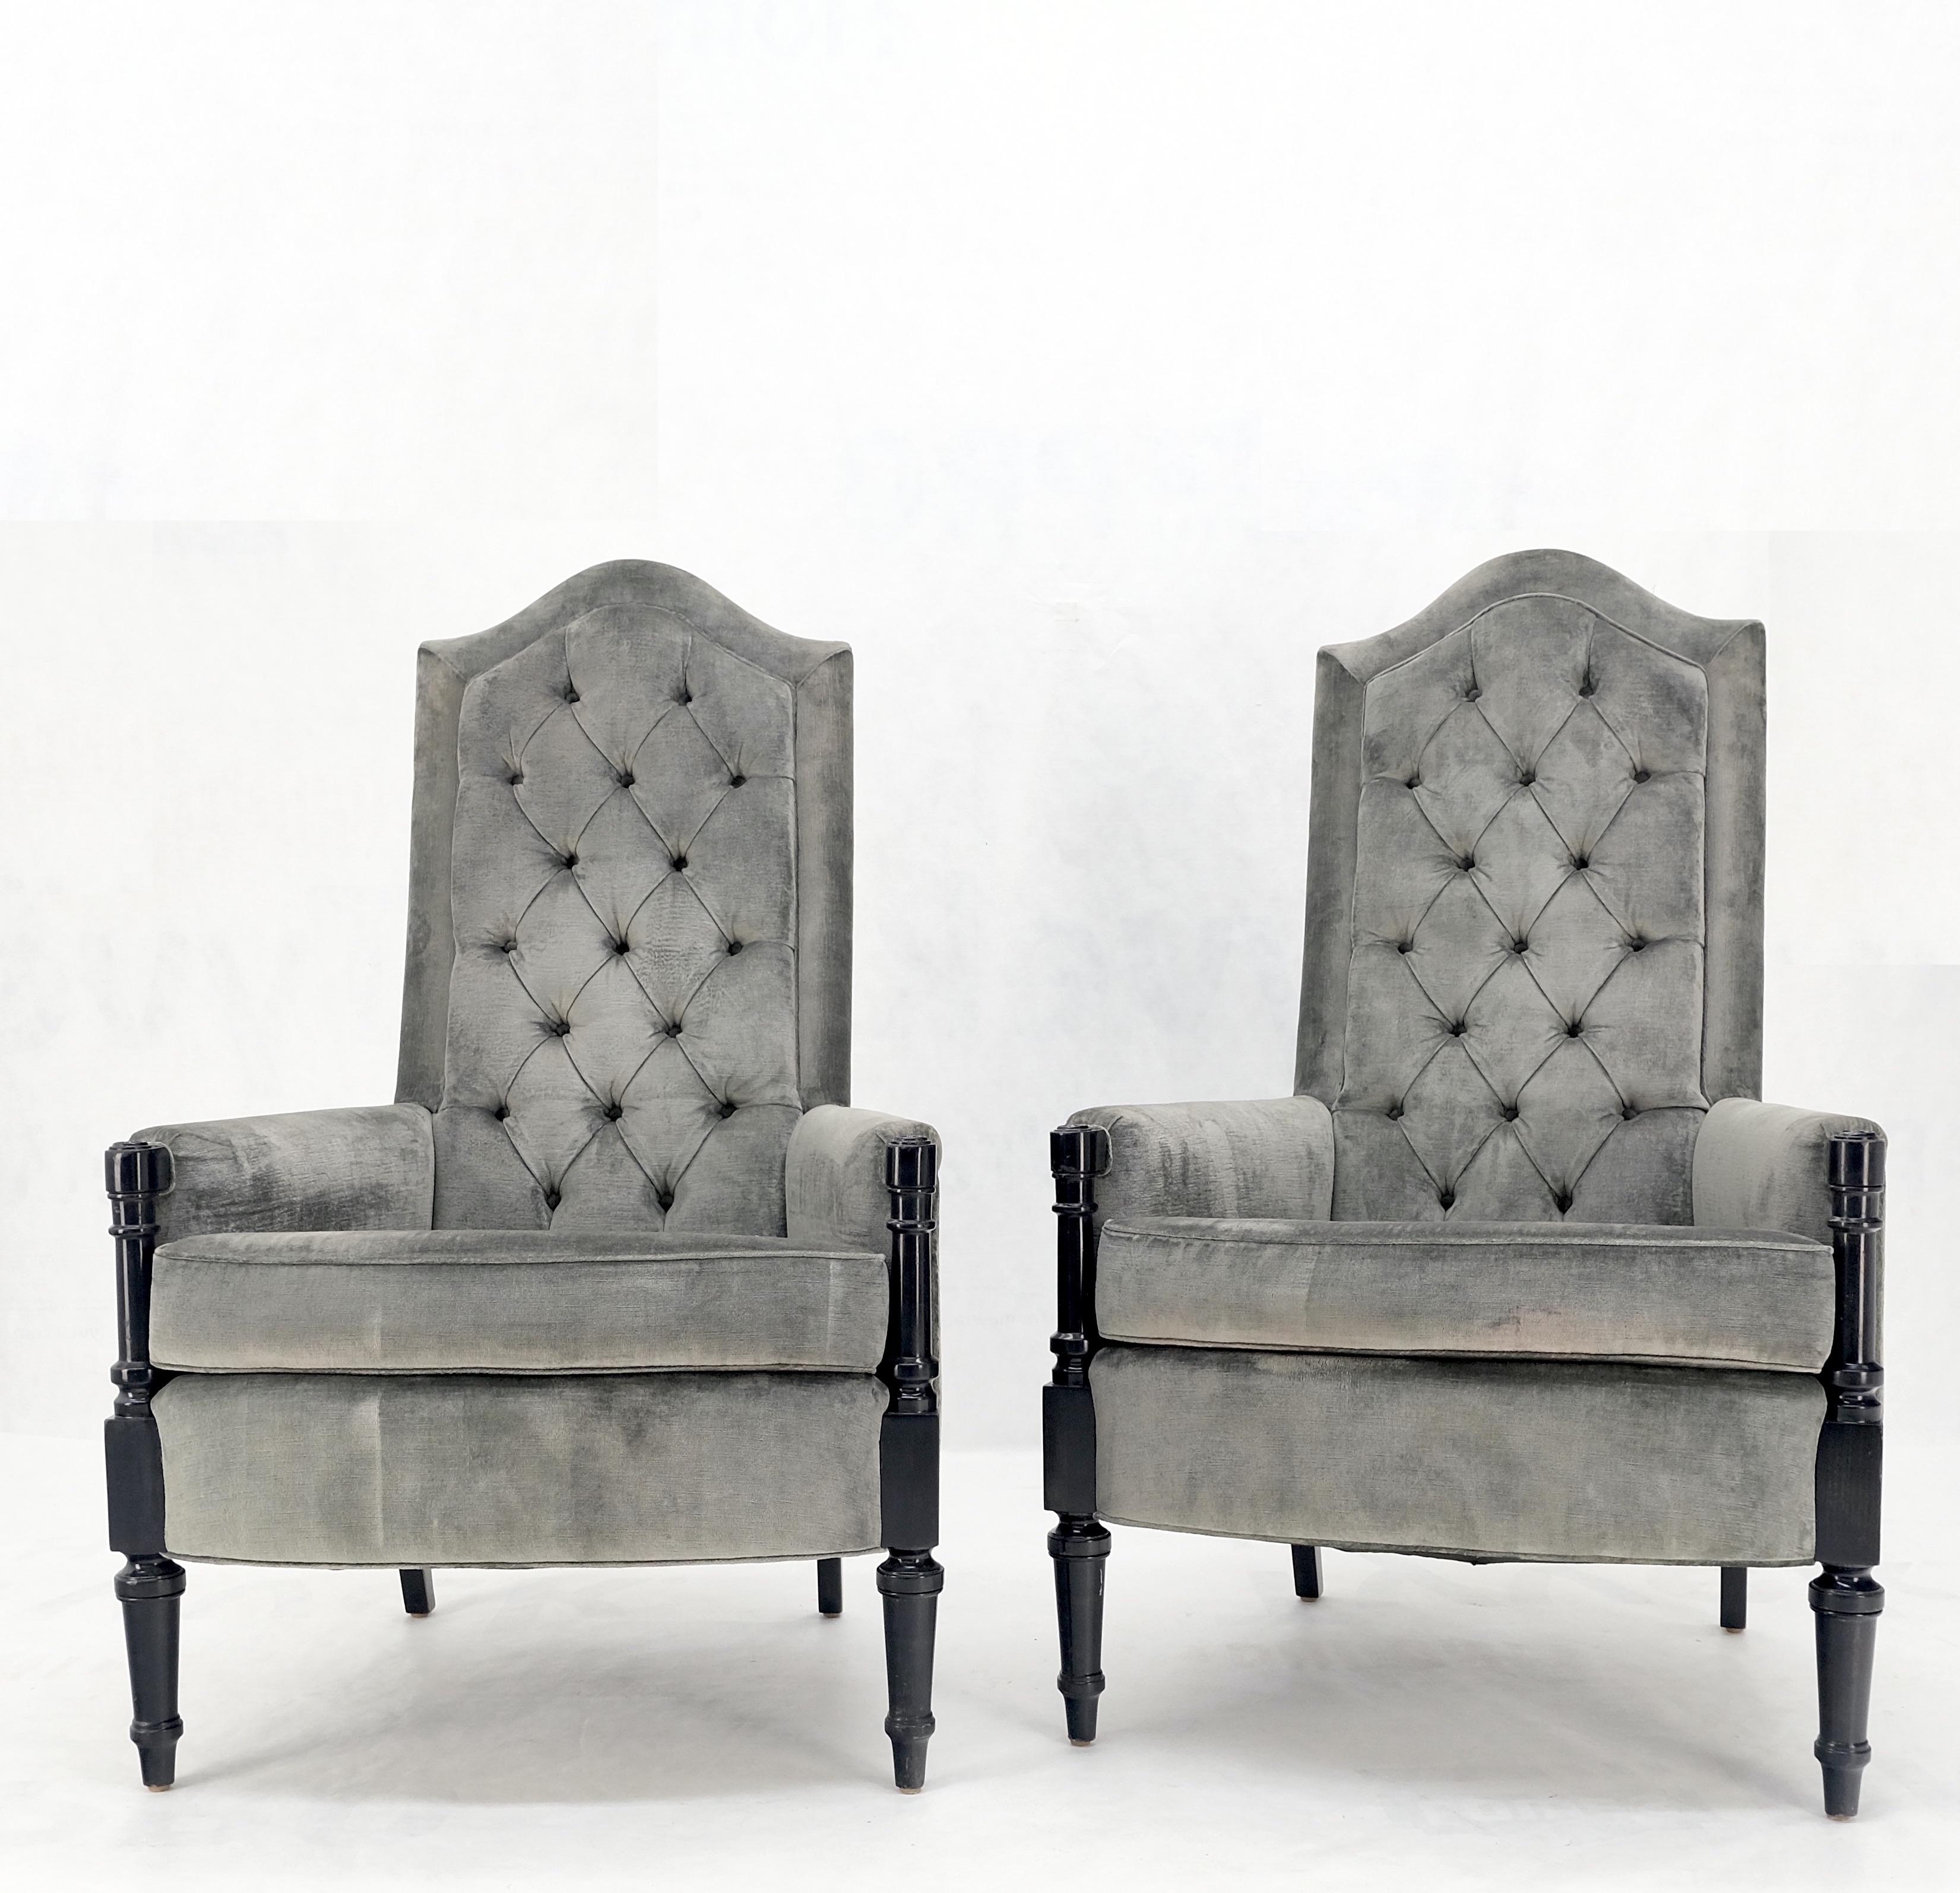 Pair of Tall Tufted Backs Black Lacquer Frames Decorative Arm Chairs Thrones For Sale 1